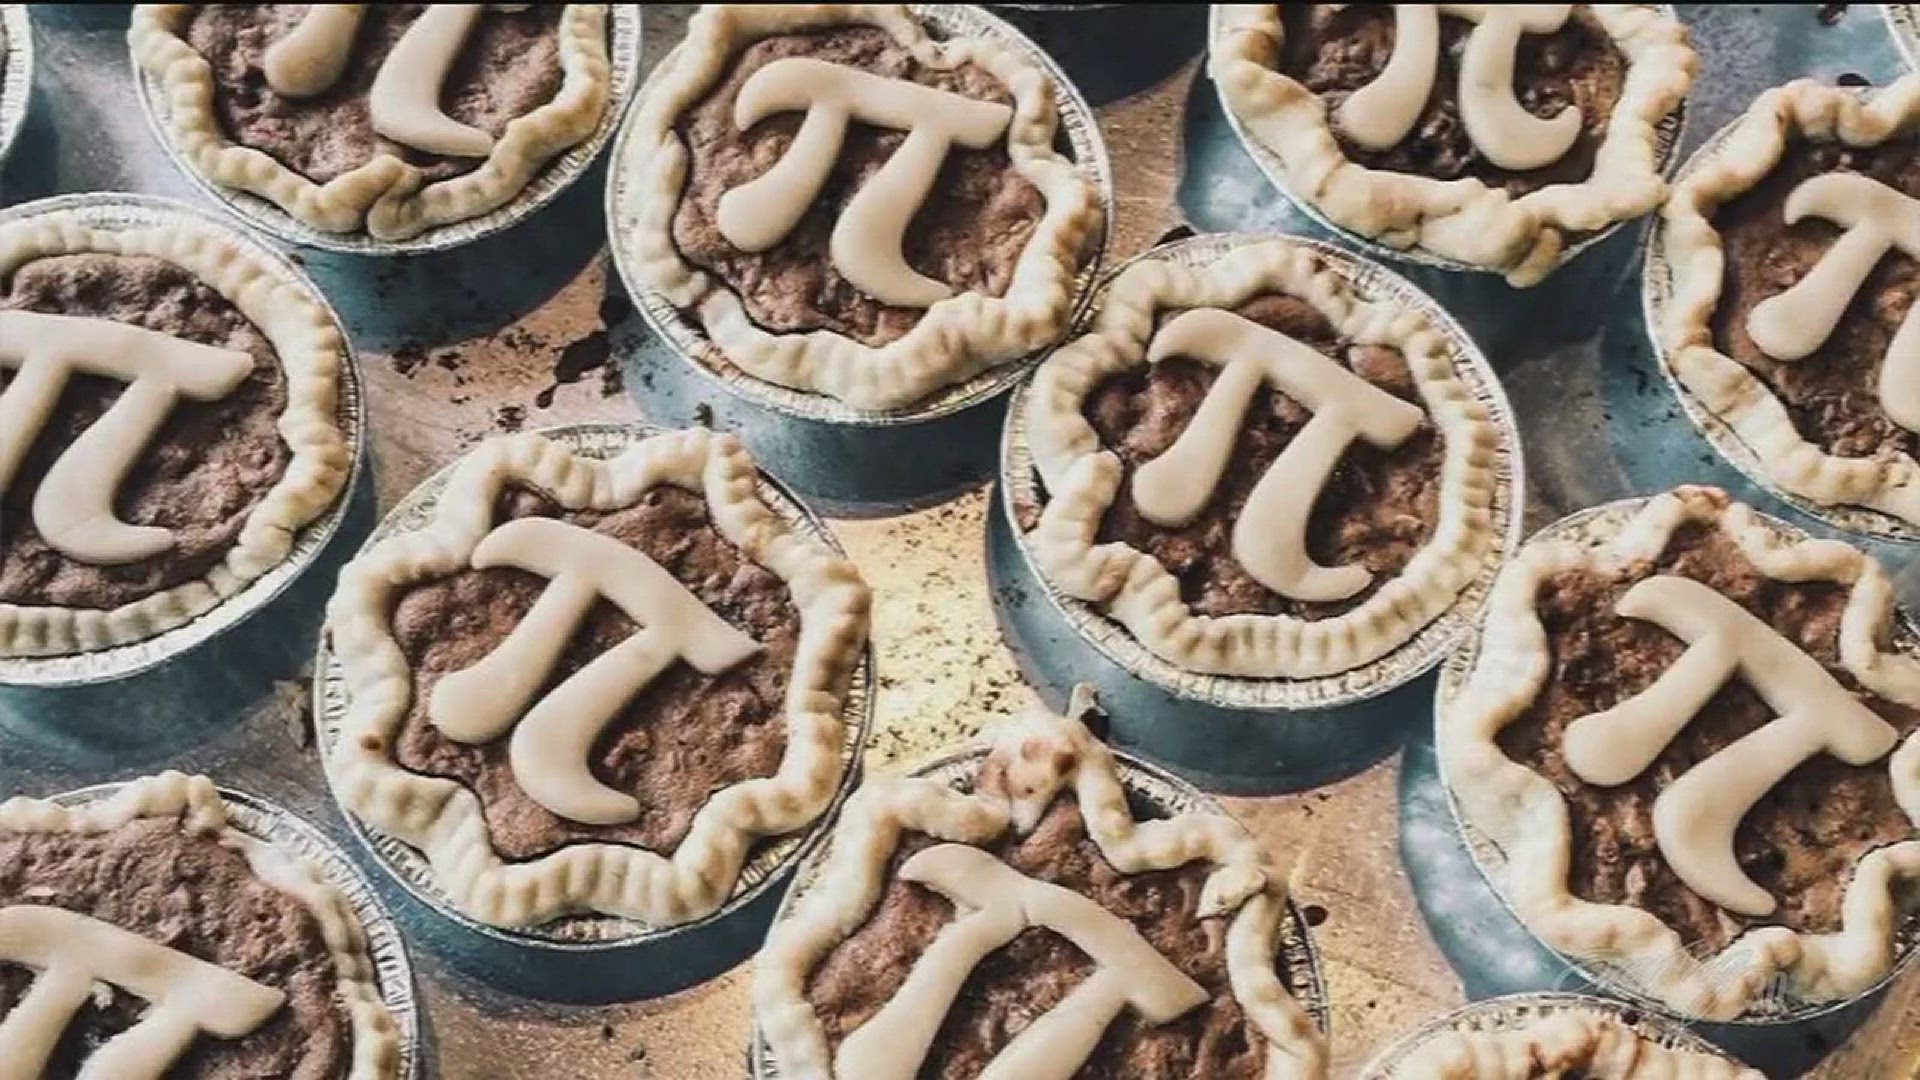 Got Pi? The Snohomish Pie Co. is making Pi Pies for 3/14.